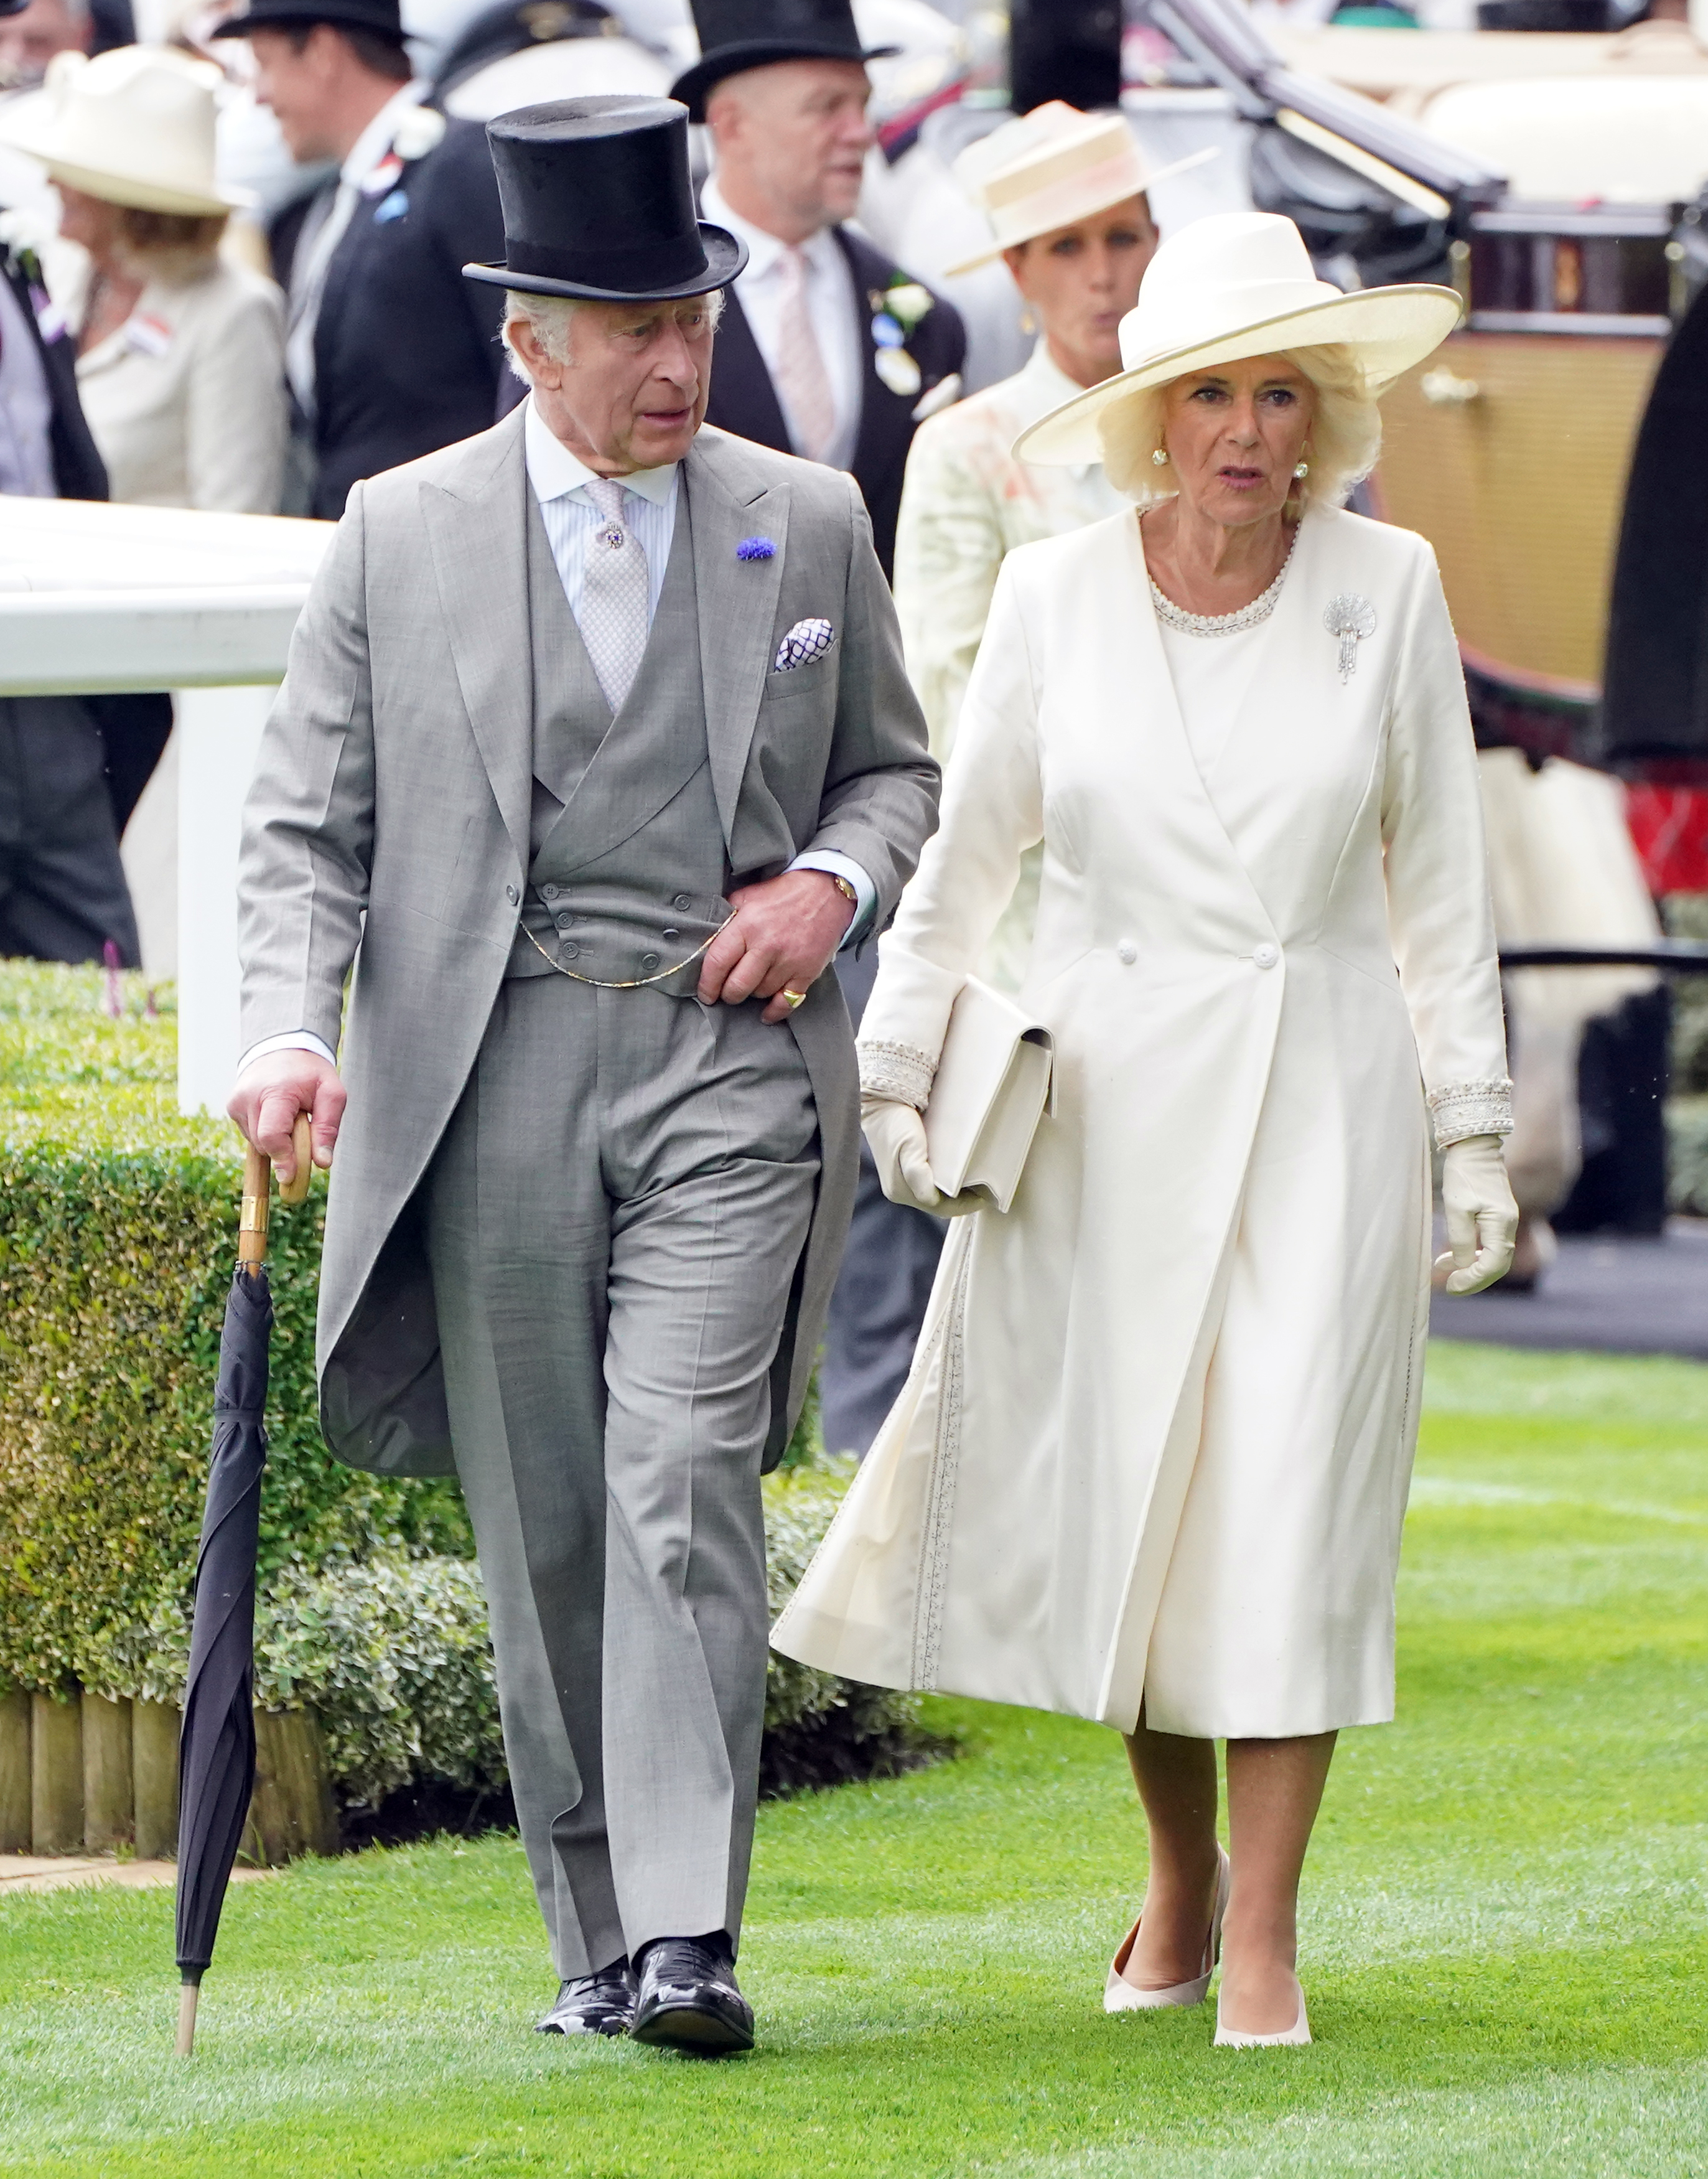 <p>King Charles III and Queen Camilla arrived for day one of Royal Ascot at Ascot Racecourse in England's Berkshire region on June 20, 2023.</p>